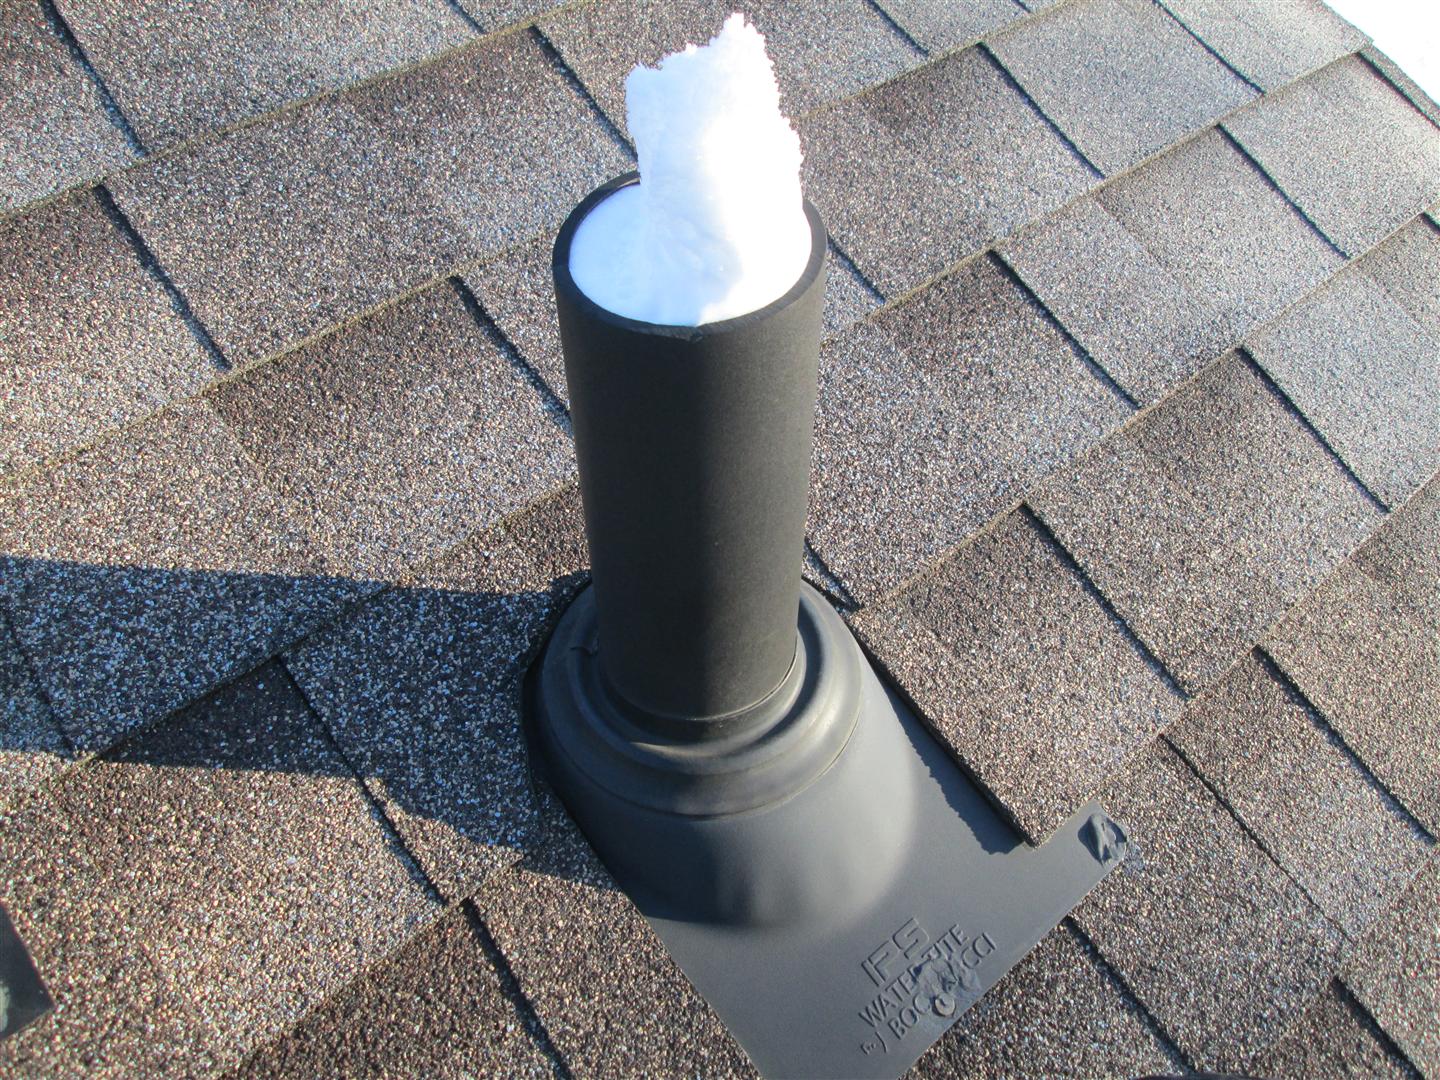 frost free sewer vent reviews